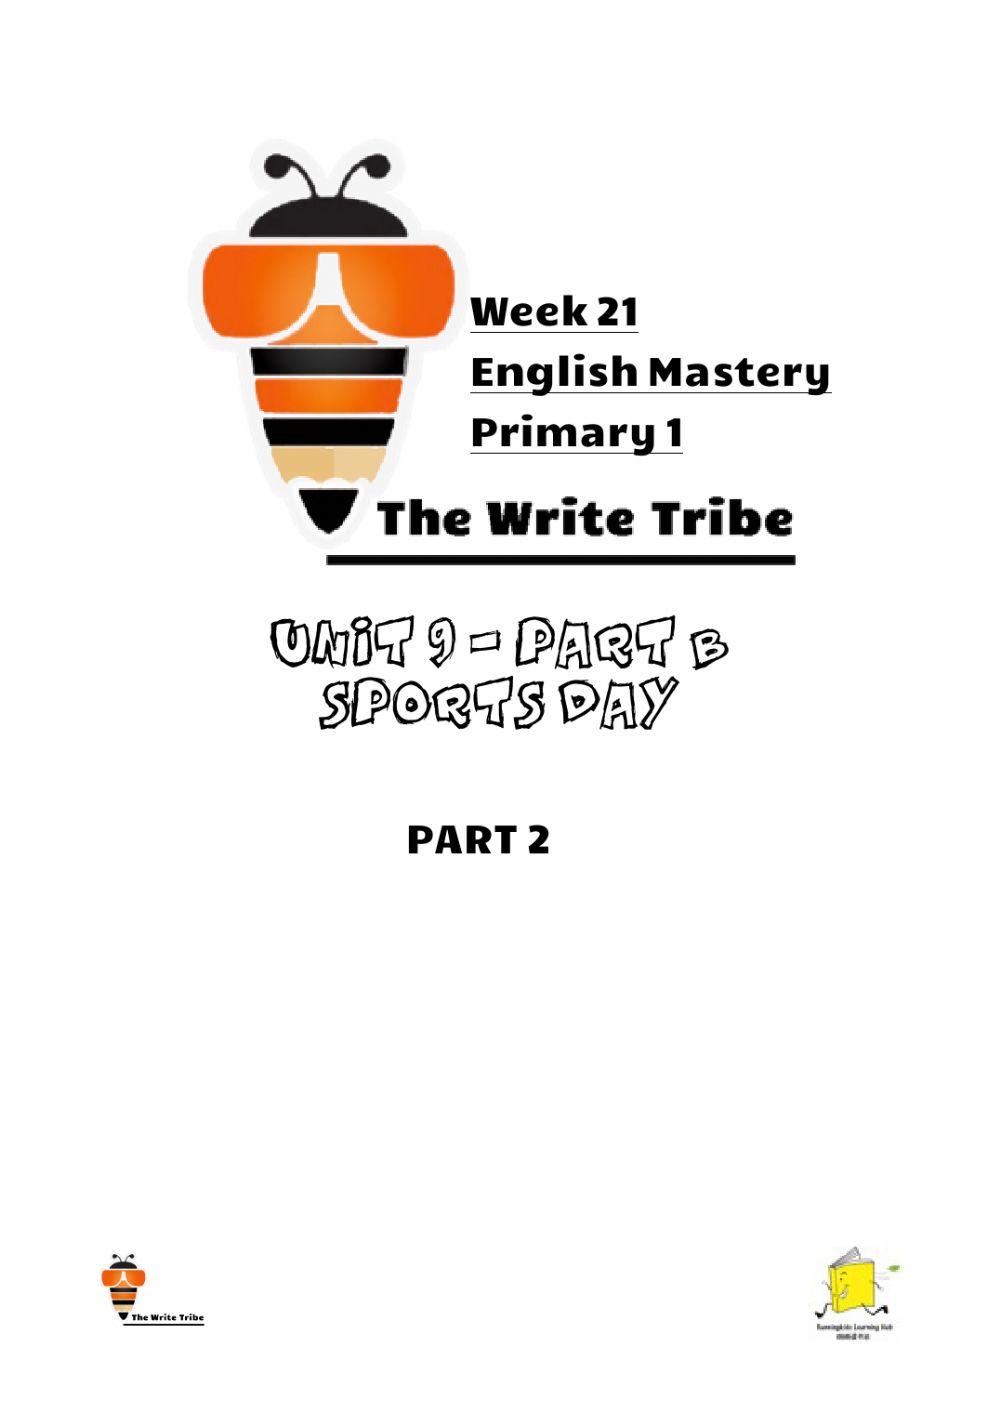 Week 21 e-learning p1 part 2